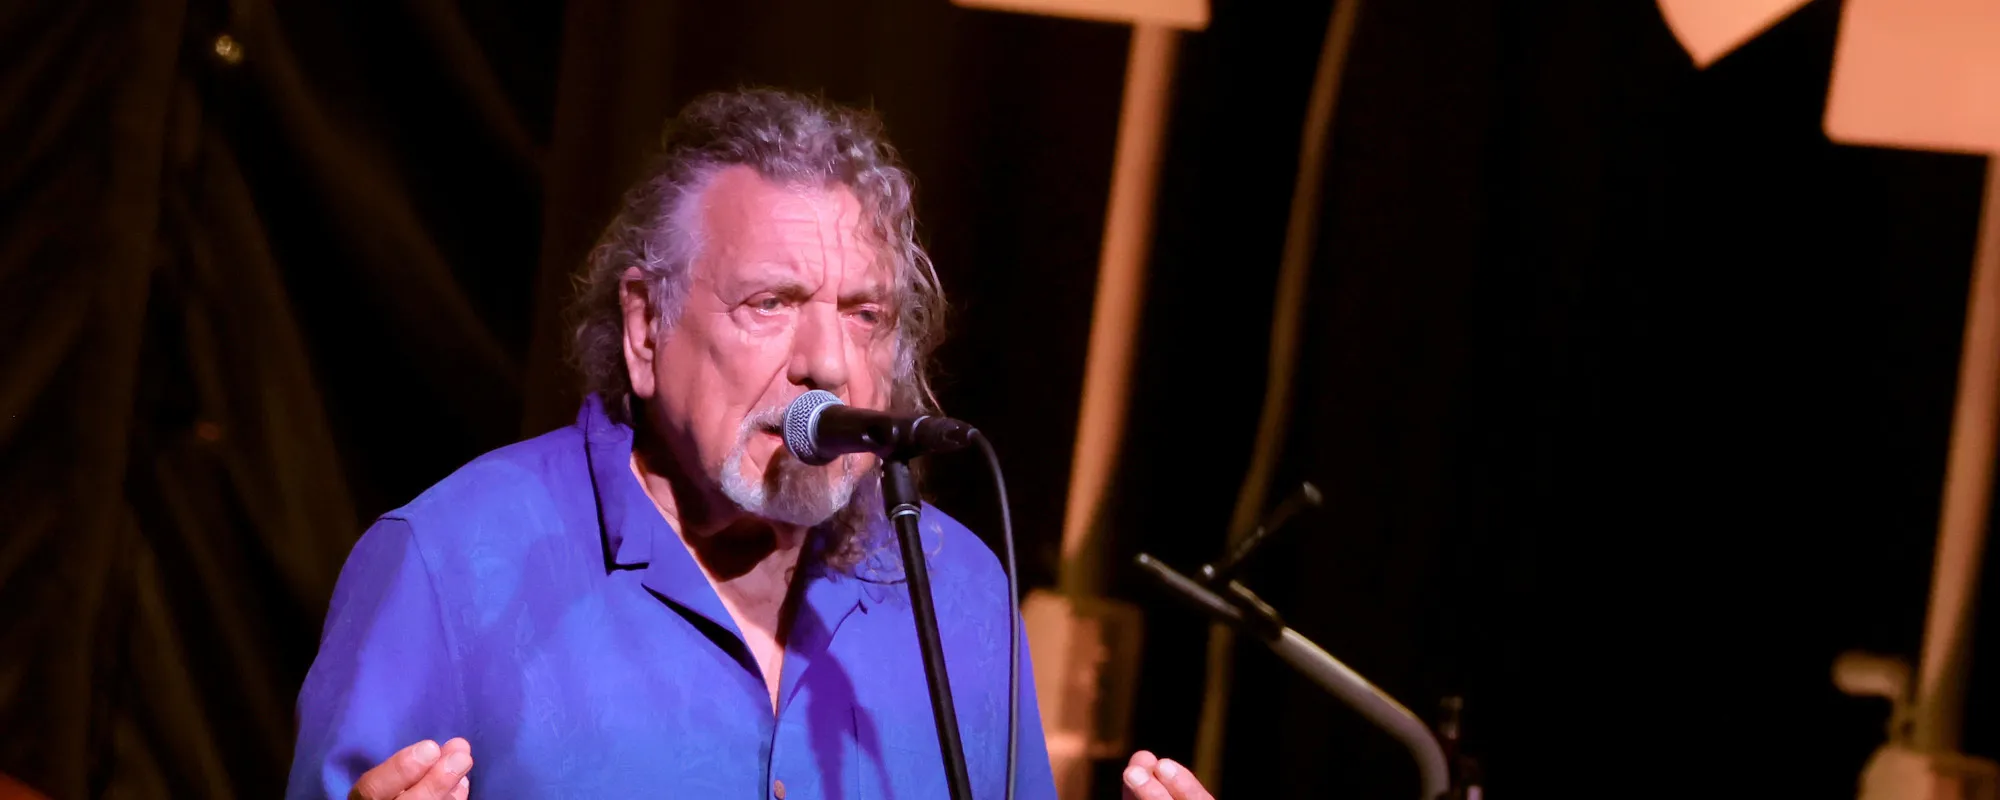 Watch: Robert Plant Performs “Stairway to Heaven” for First Time in 16 Years